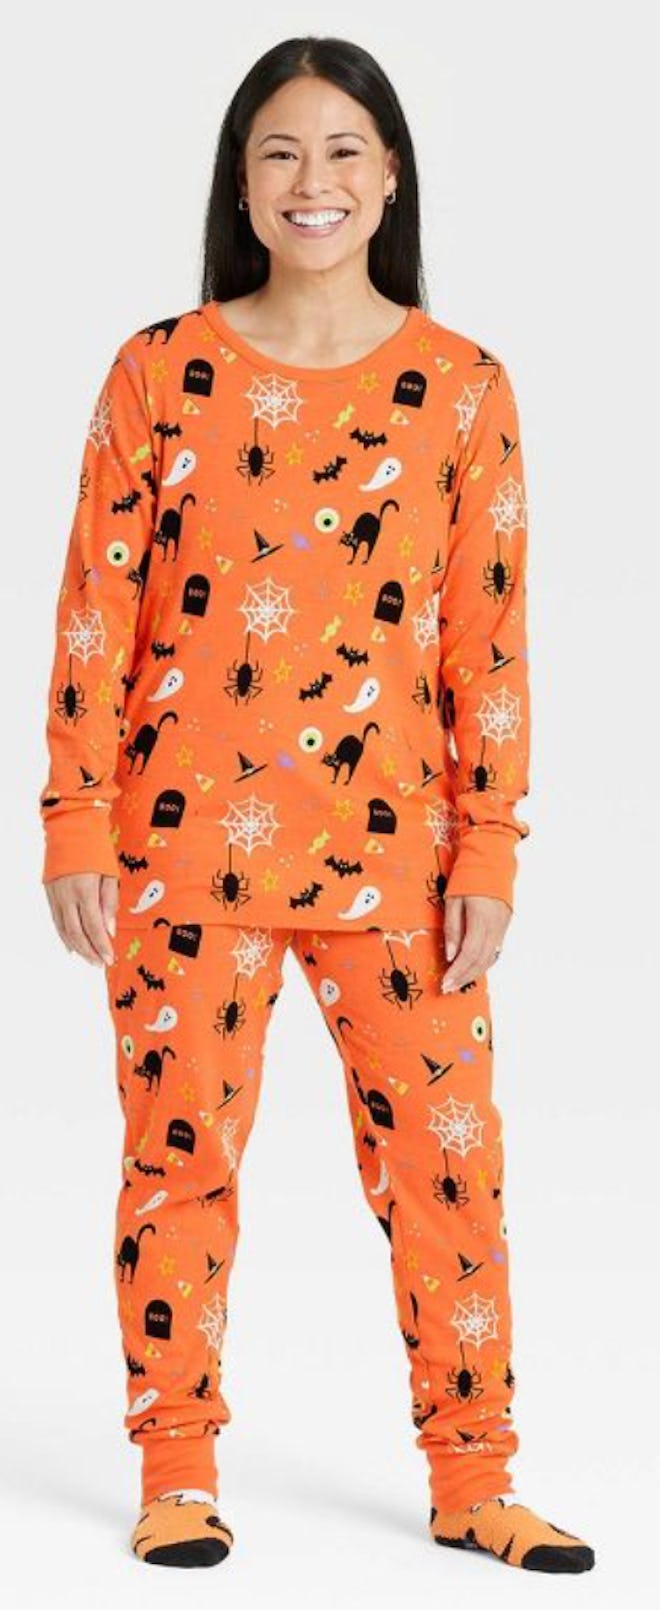 Hyde & EEK! Boutique Women's Halloween Matching Family Pajama Set is one of the best Halloween famil...